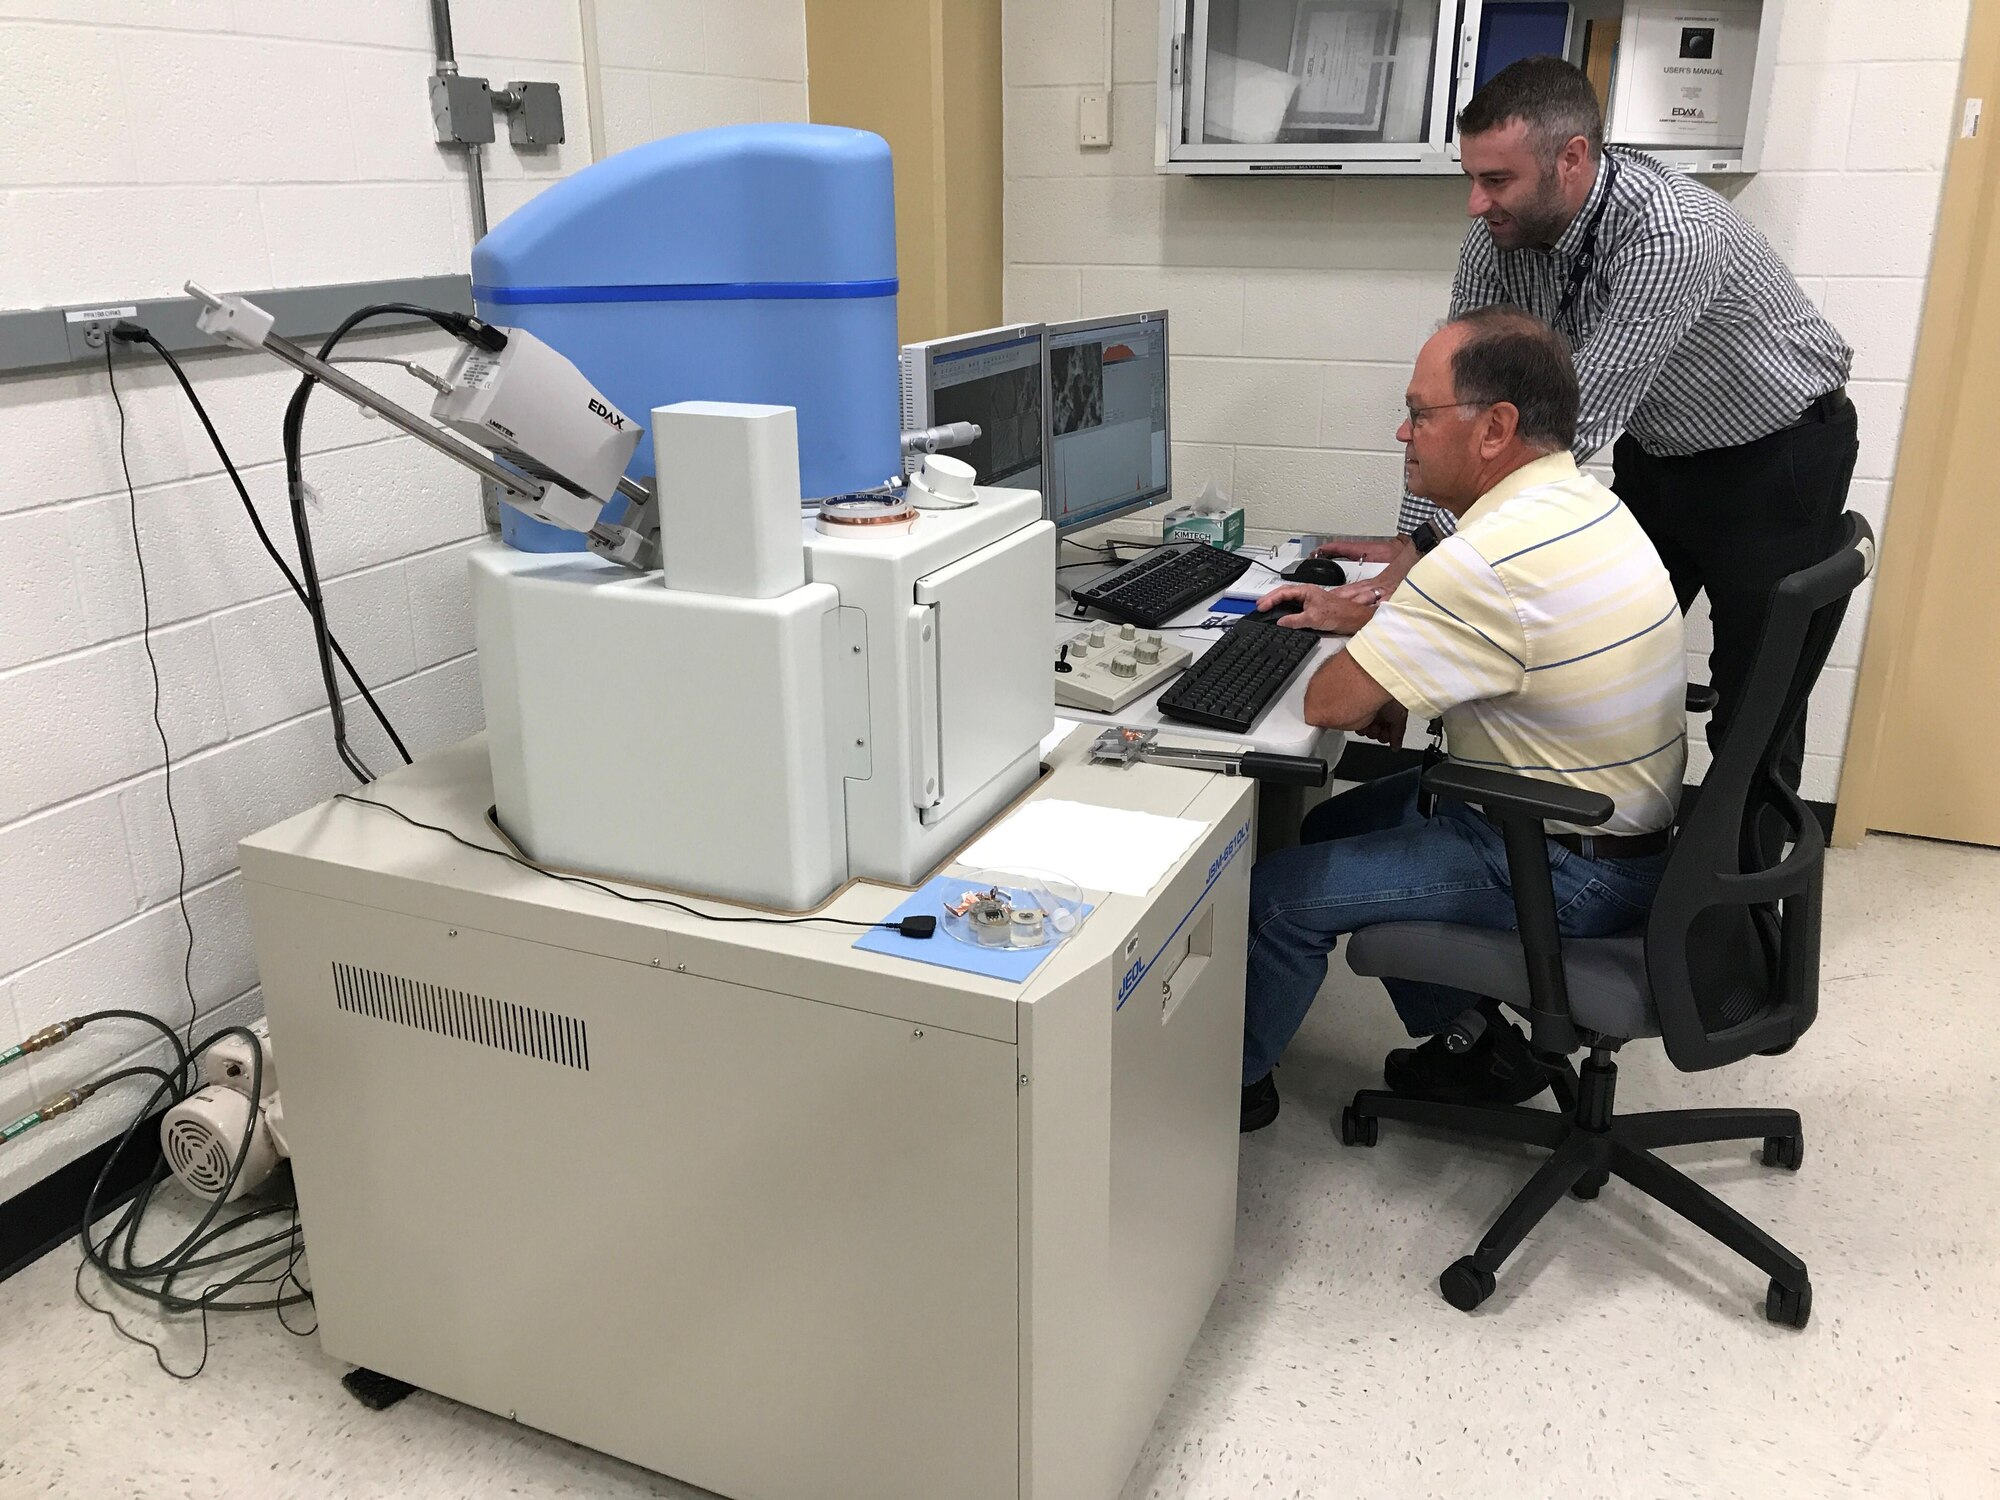 AFRL Materials Integrity researchers review microscopic images